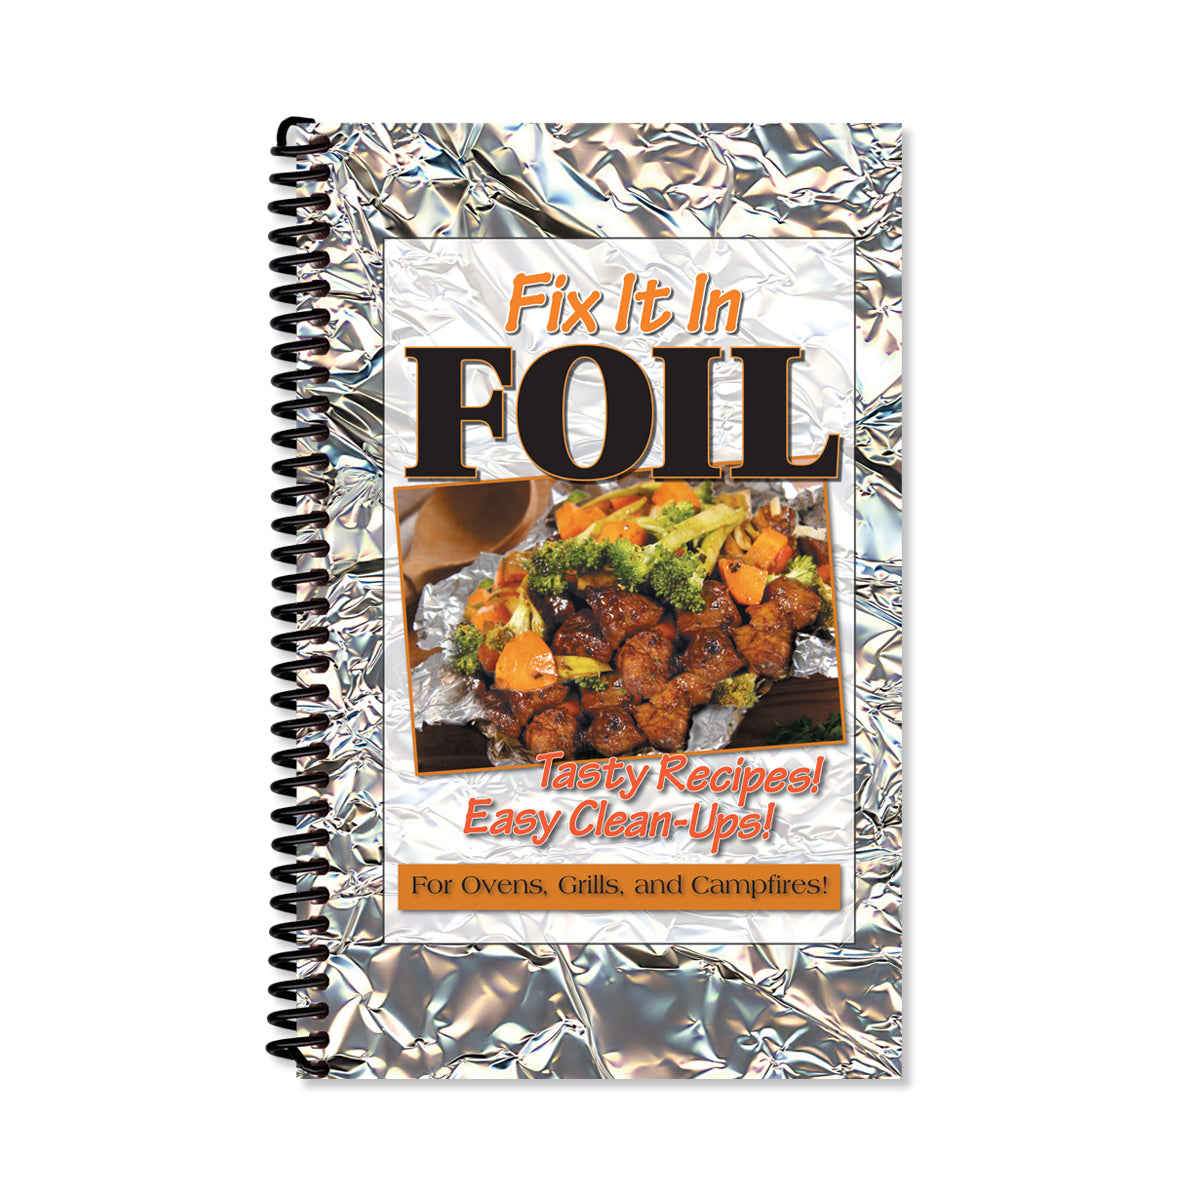 Is It Safe to Cook With Aluminum Foil? We Did a Deep Dive